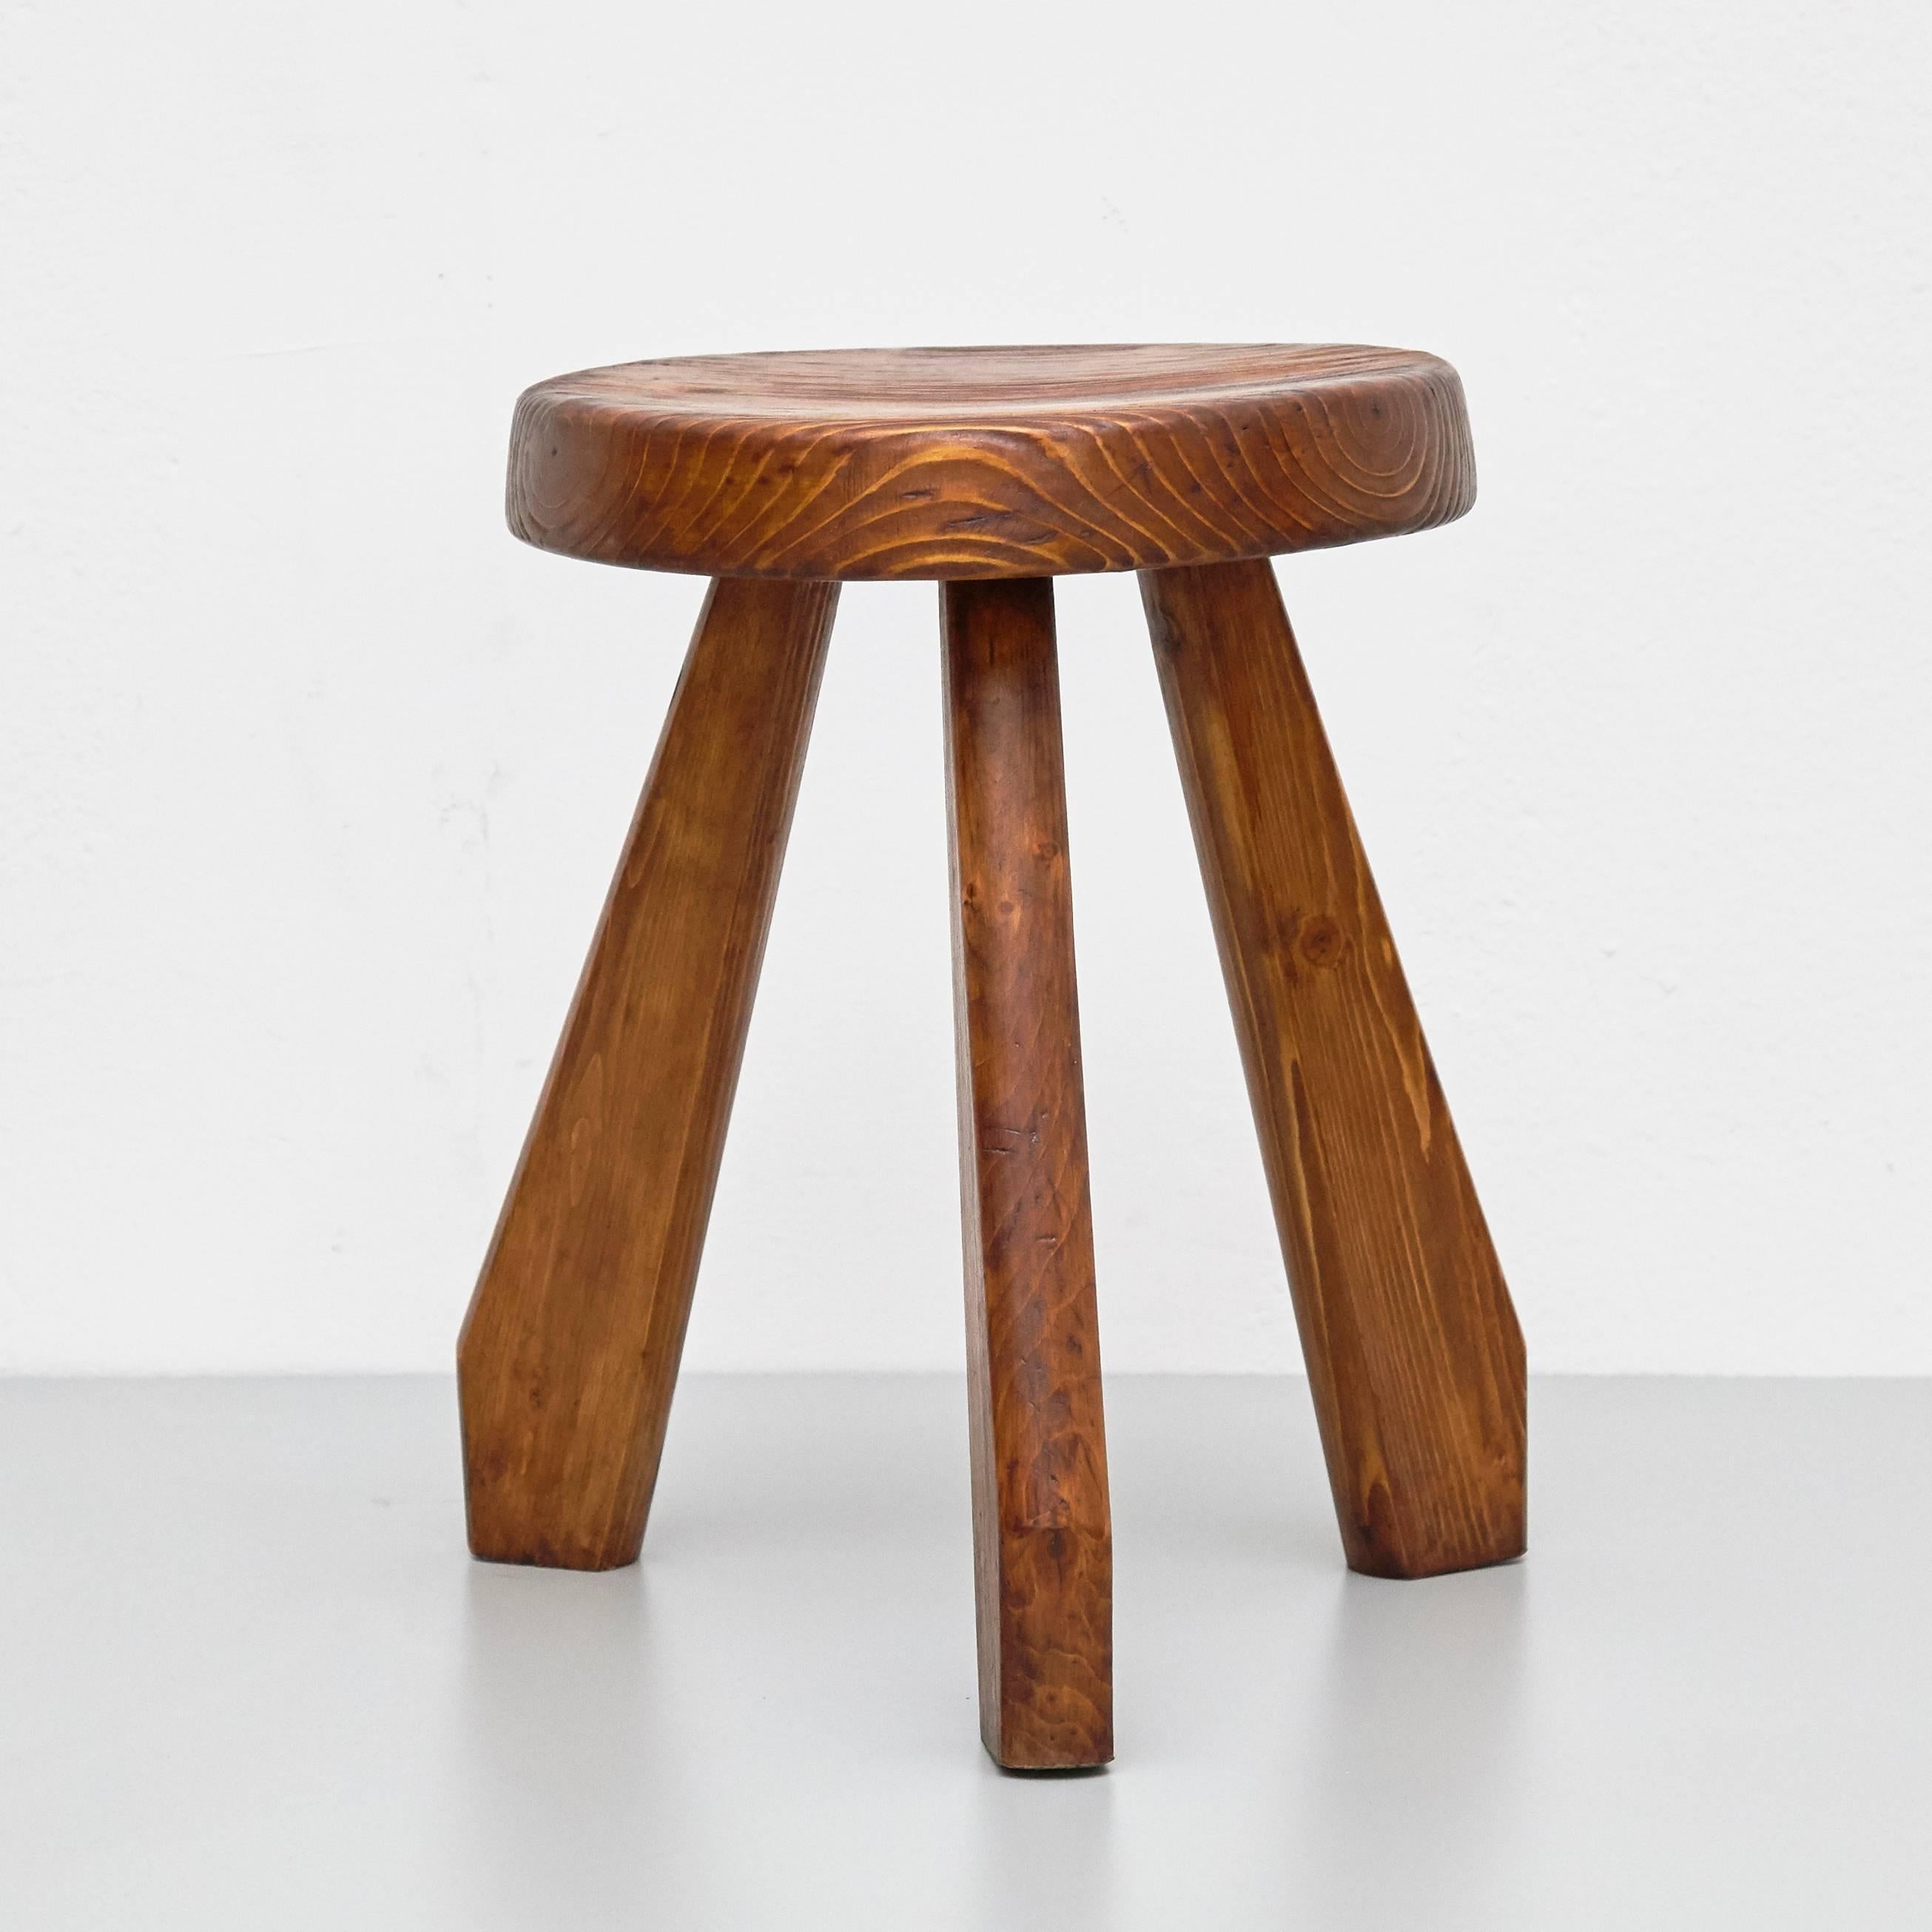 Stool, model Sandoz, designed by Charlotte Perriand, circa 1960.
Manufactured in France.
Pine wood.

In good original condition, with minor wear consistent with age and use, preserving a beautiful patina.

Charlotte Perriand (1903-1999). She